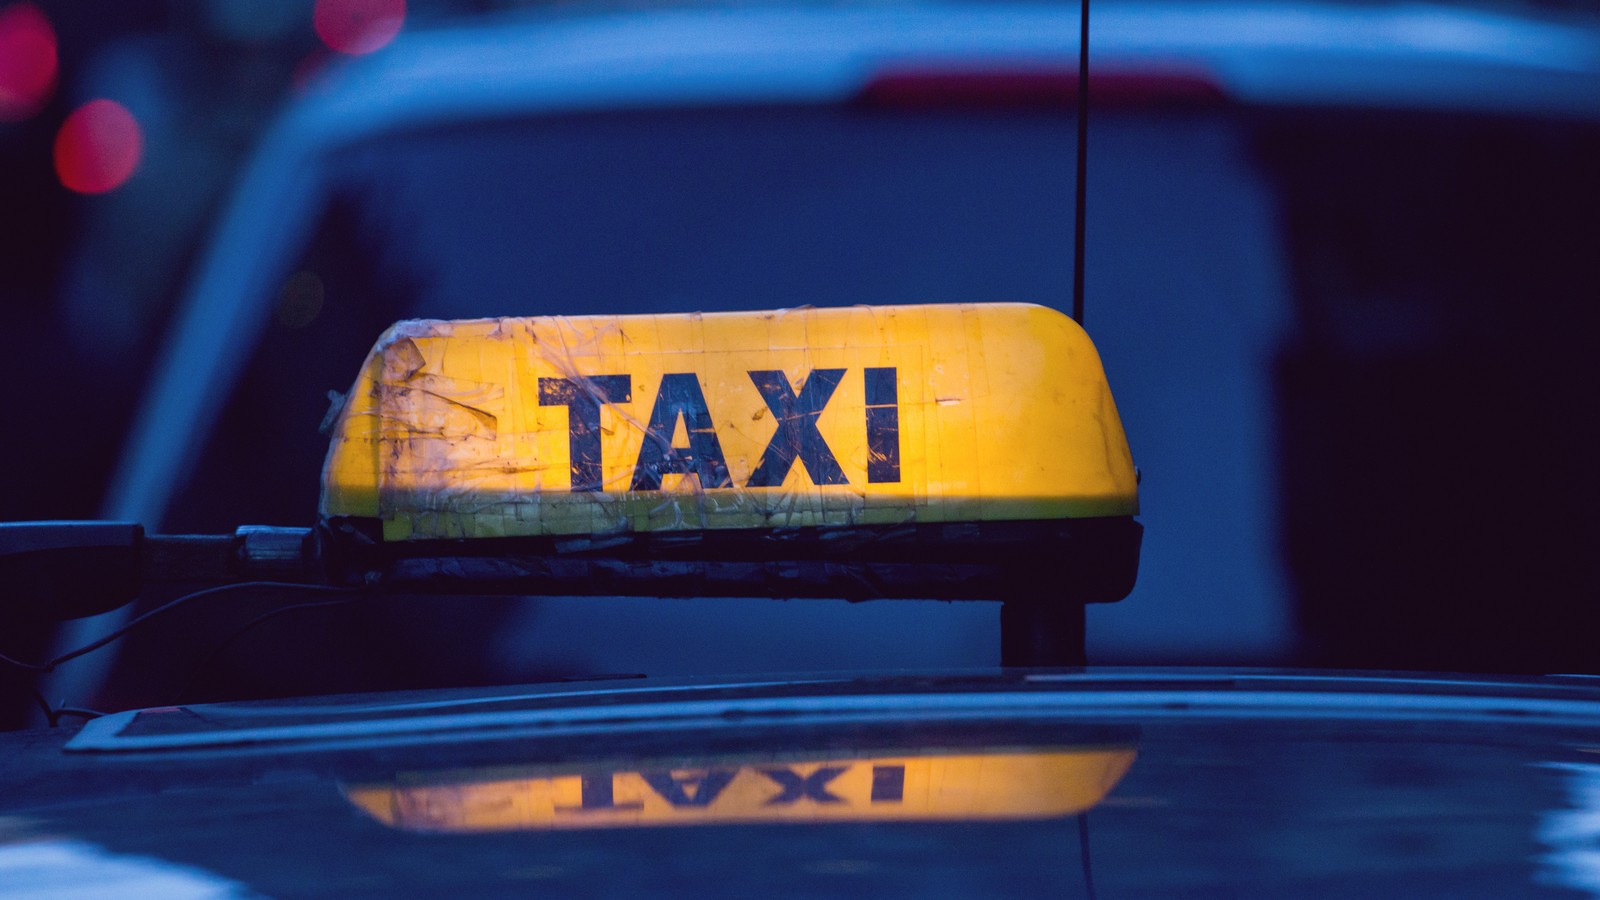 Are Taxis Safer Than Uber? - The Atlantic